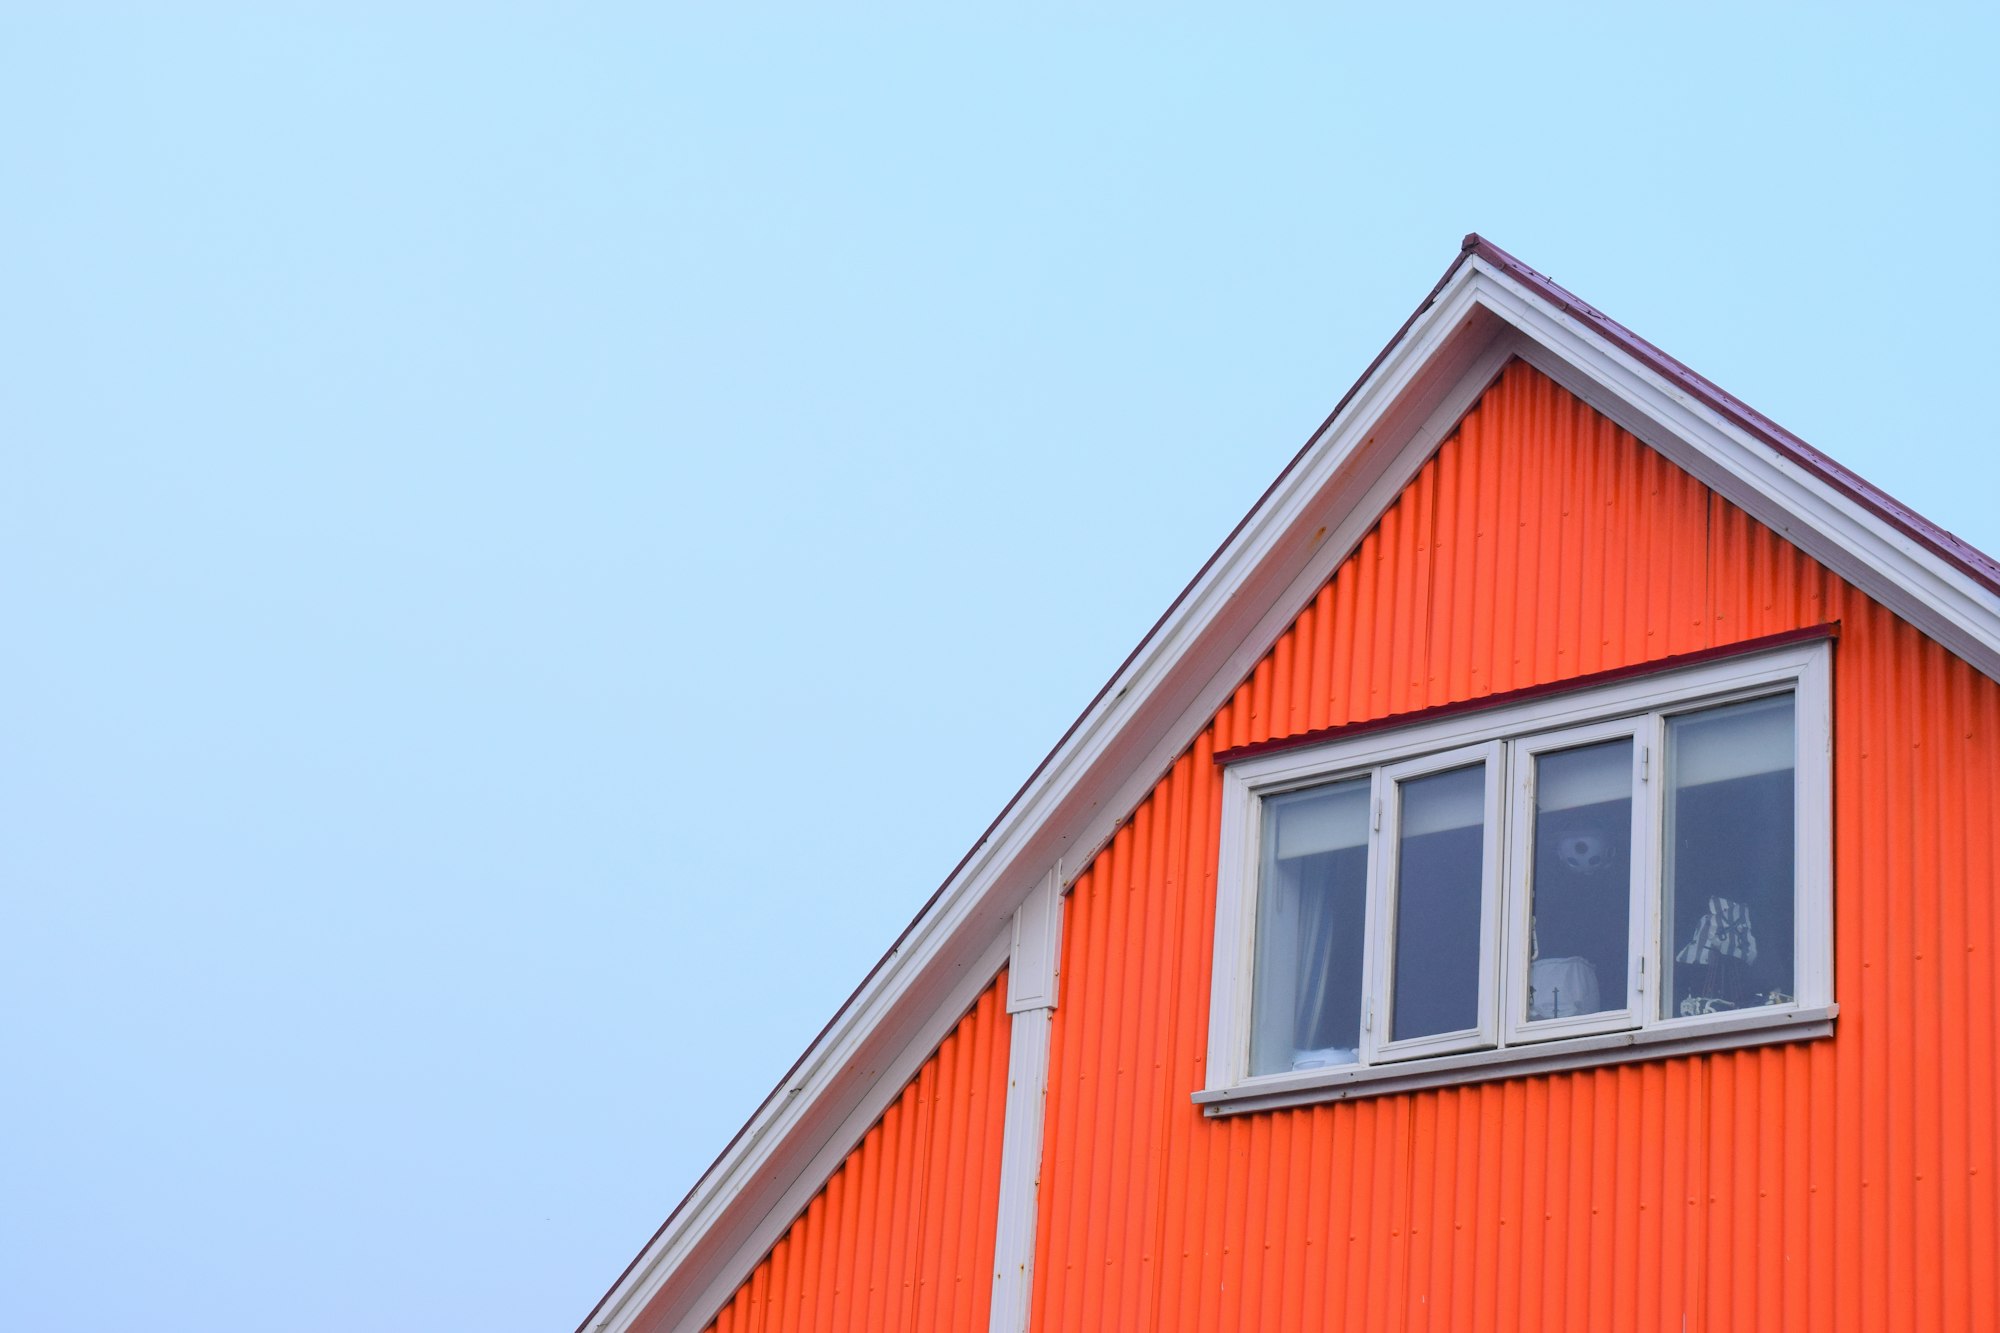 This photo was taken looking up at a classic Nordic house in Reykjavik, contrasted against the winter sky